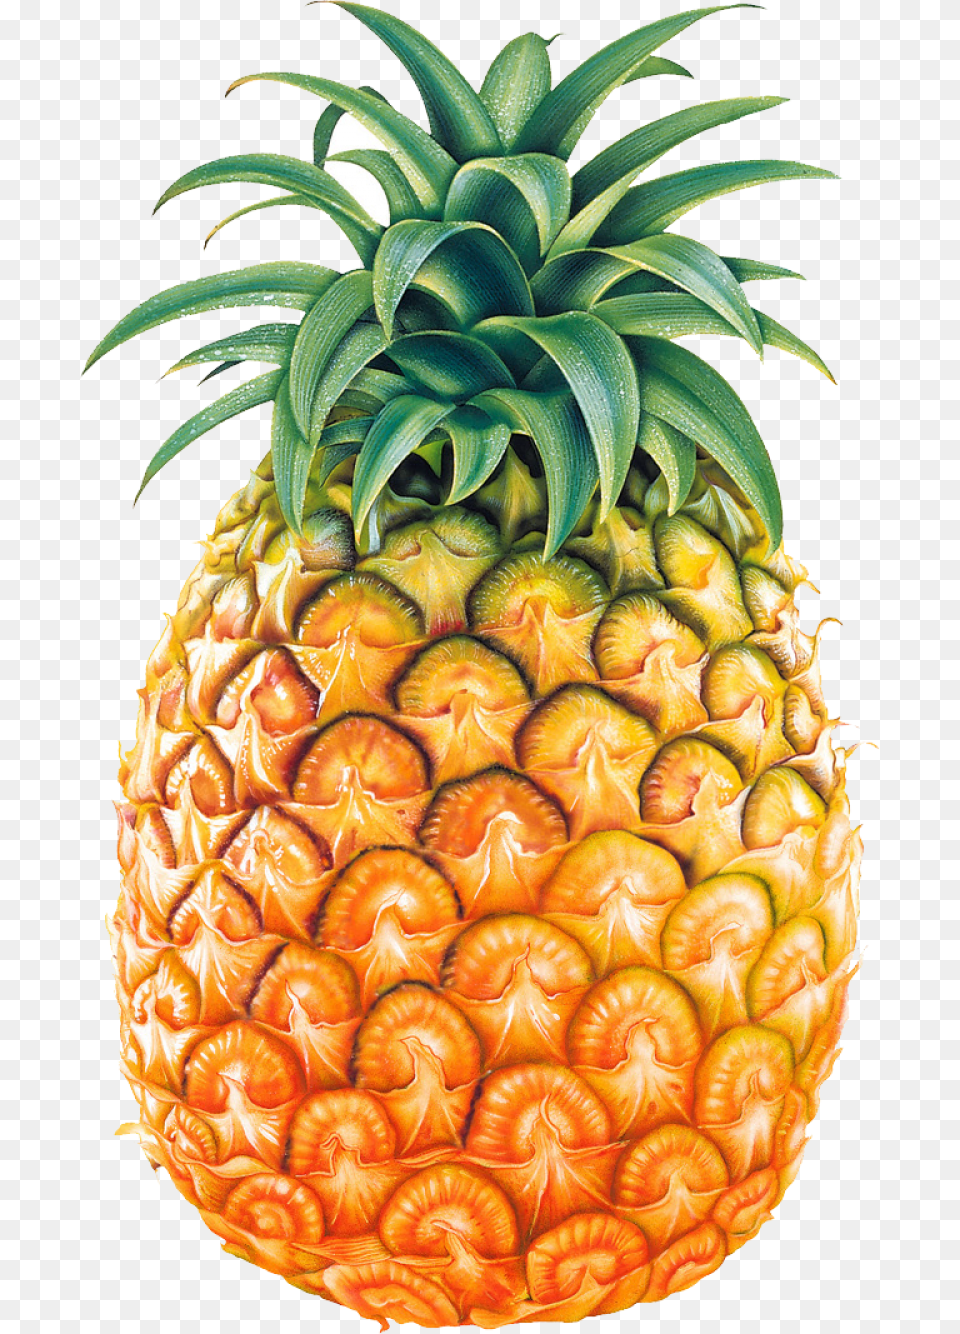 Pineapple Fruit Pineapple, Food, Plant, Produce Png